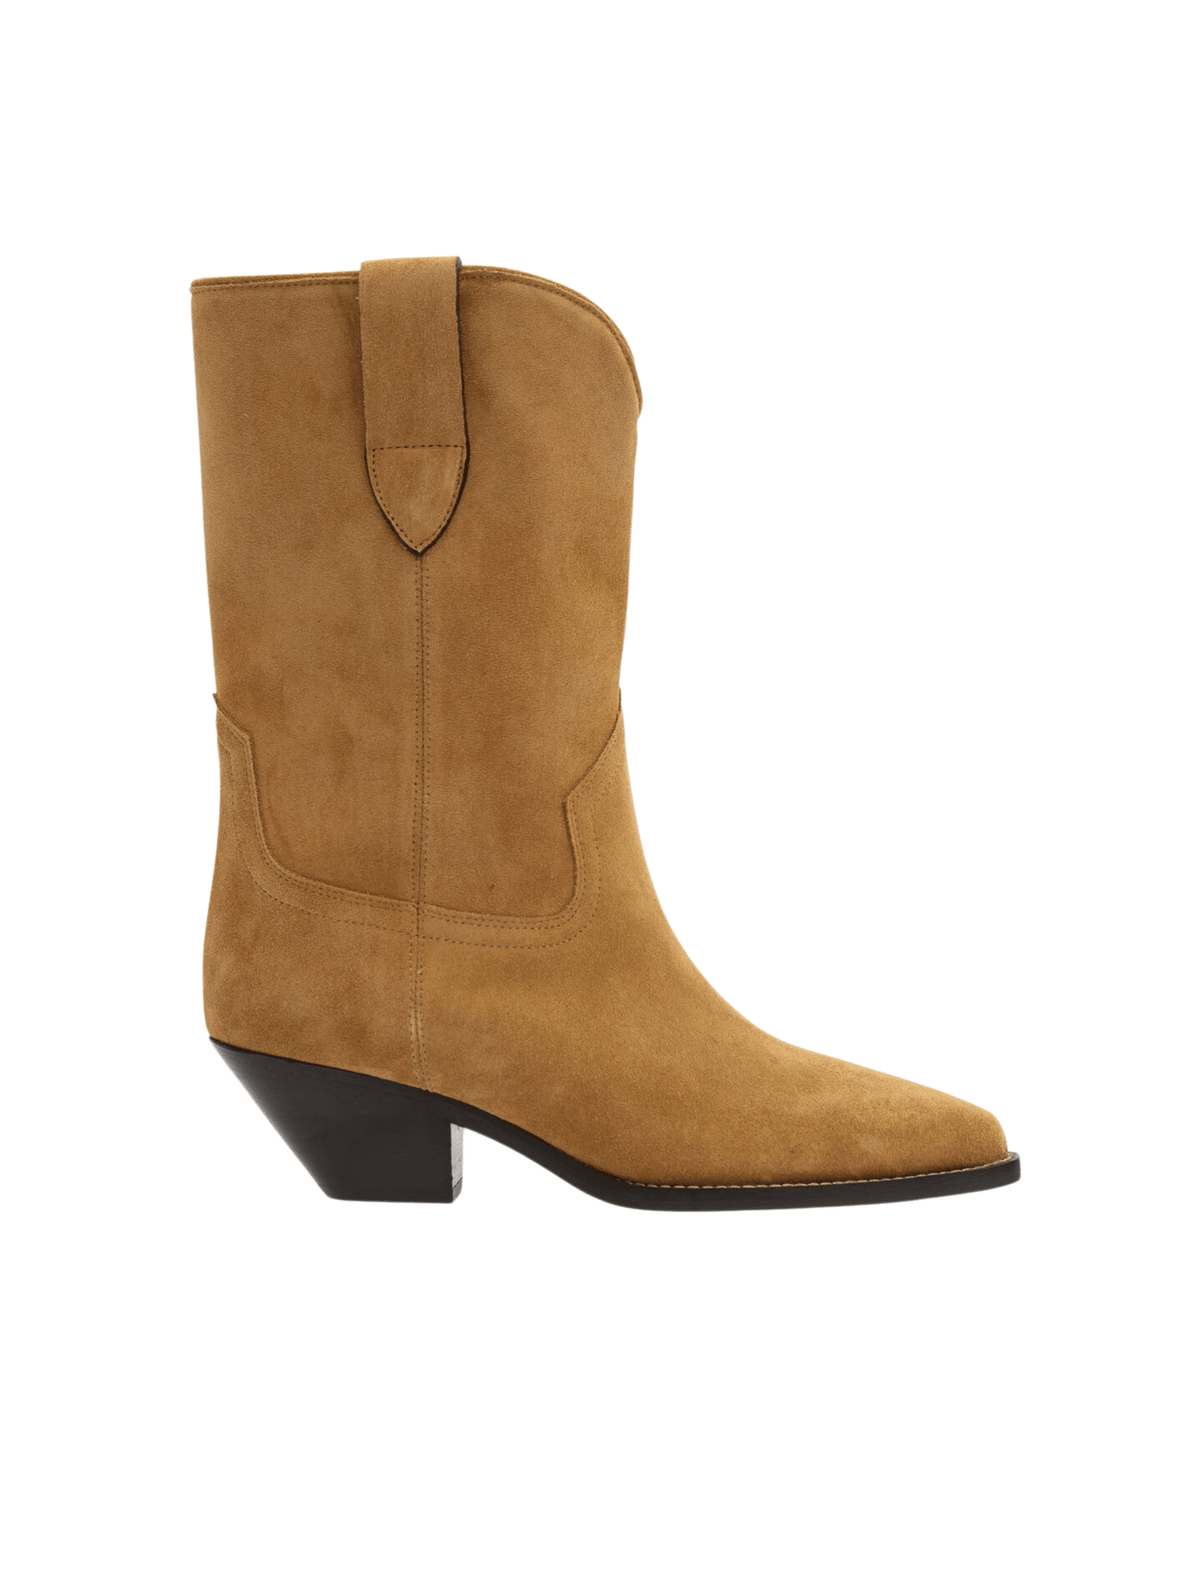 Dahope / Taupe Womens Isabel Marant 